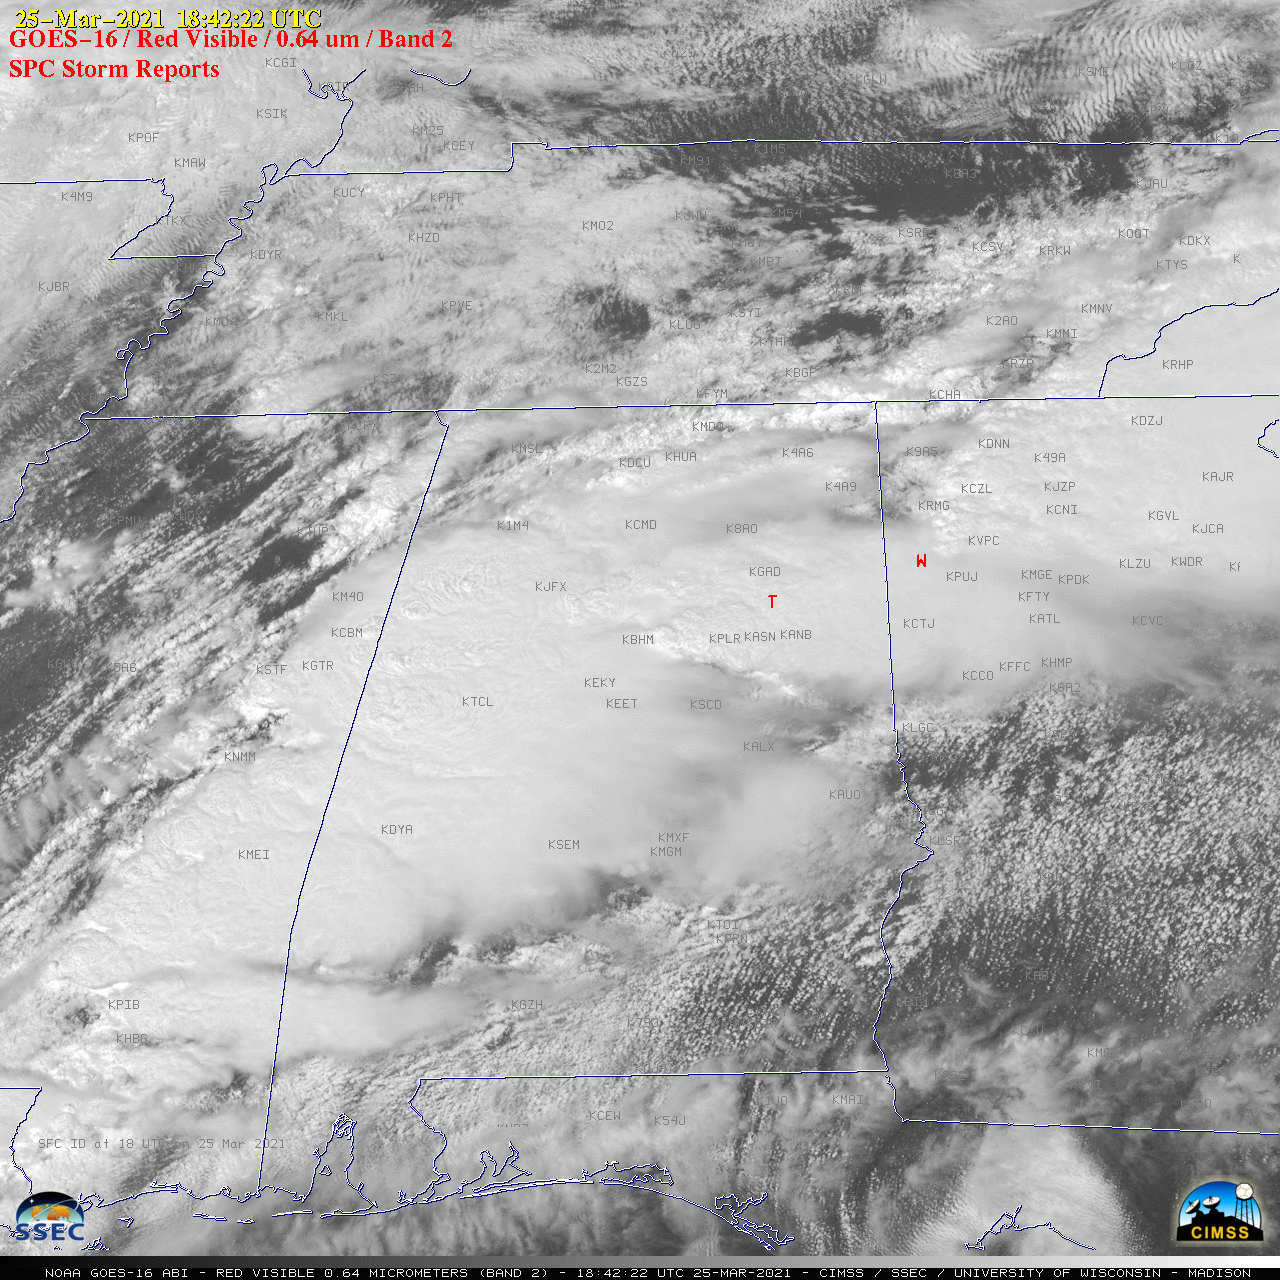 GOES-16 “Red” Visible (0.64 µm) images, with time-matched SPC Storm Reports plotted in red [click to play animation | MP4]